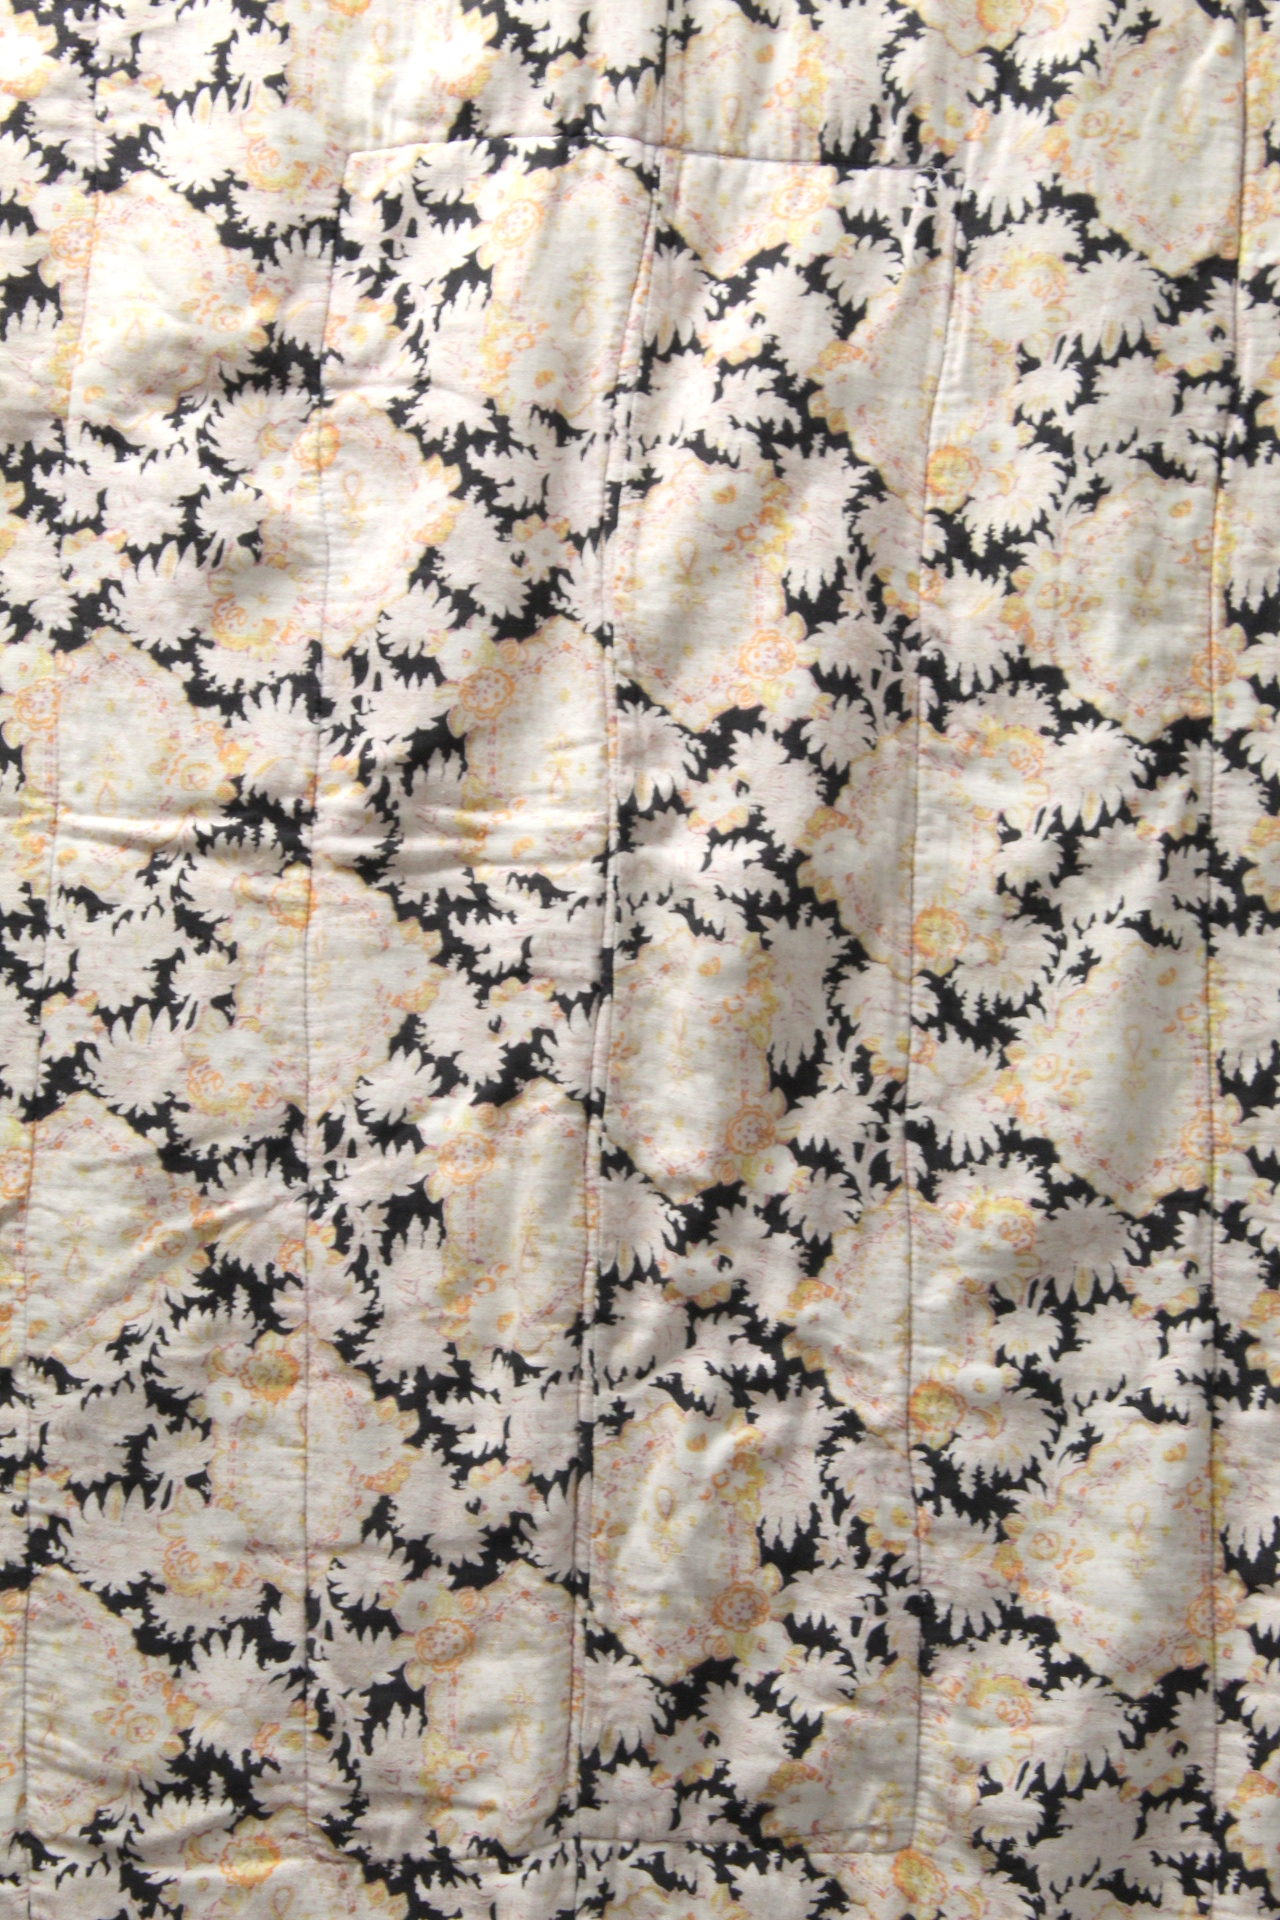 Early 20th century quilted bedspread with pale floral decoration on black ground, sky - Image 2 of 5